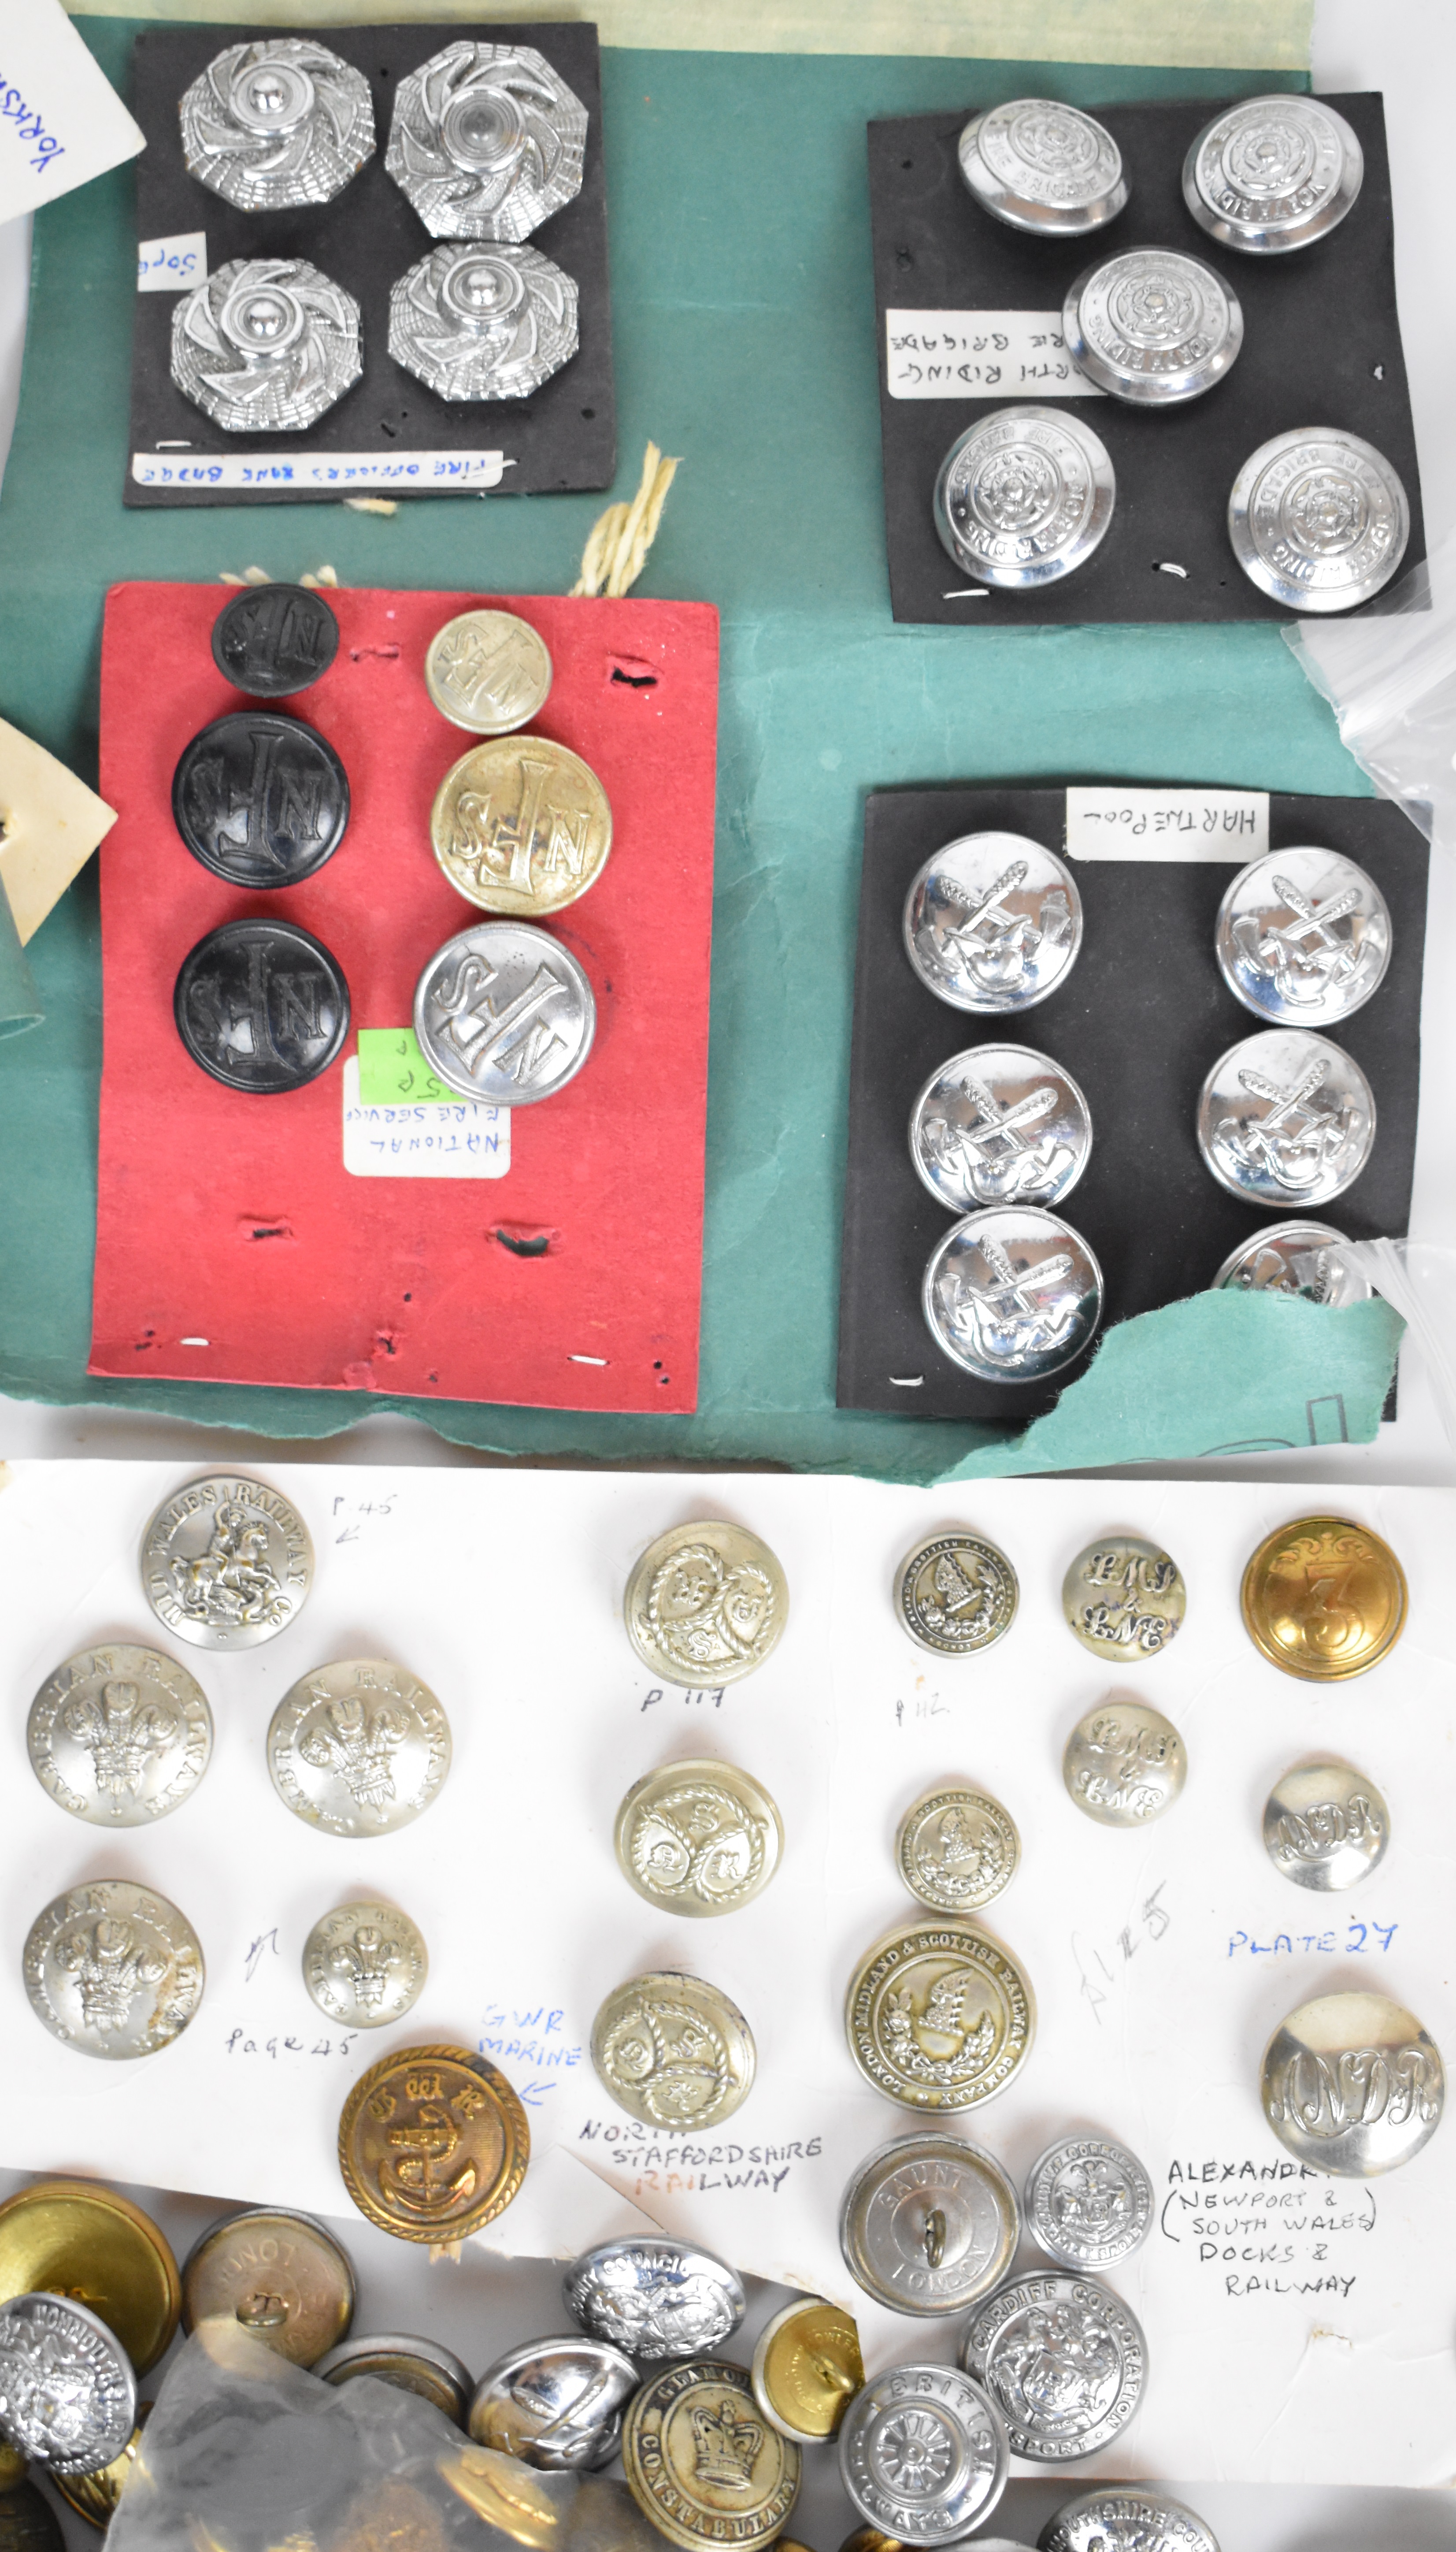 Large collection of buttons including St Johns' Ambulance, Merchants Navy, Police & Fire Brigades, - Image 3 of 6